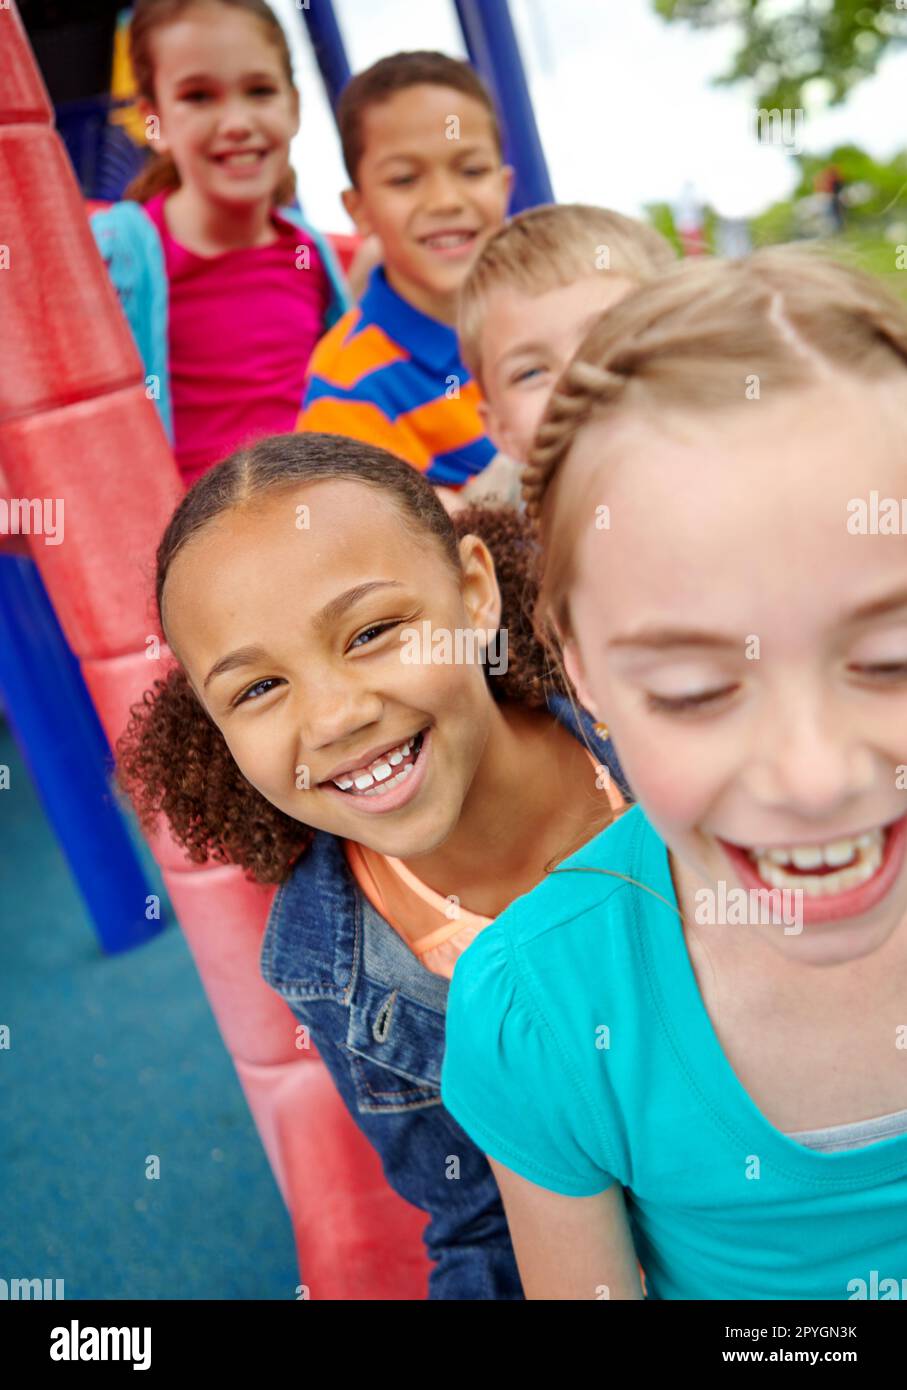 Childhood smiles and fun. A happy group of multi-ethnic children sitting happily on a slide in a play park. Stock Photo